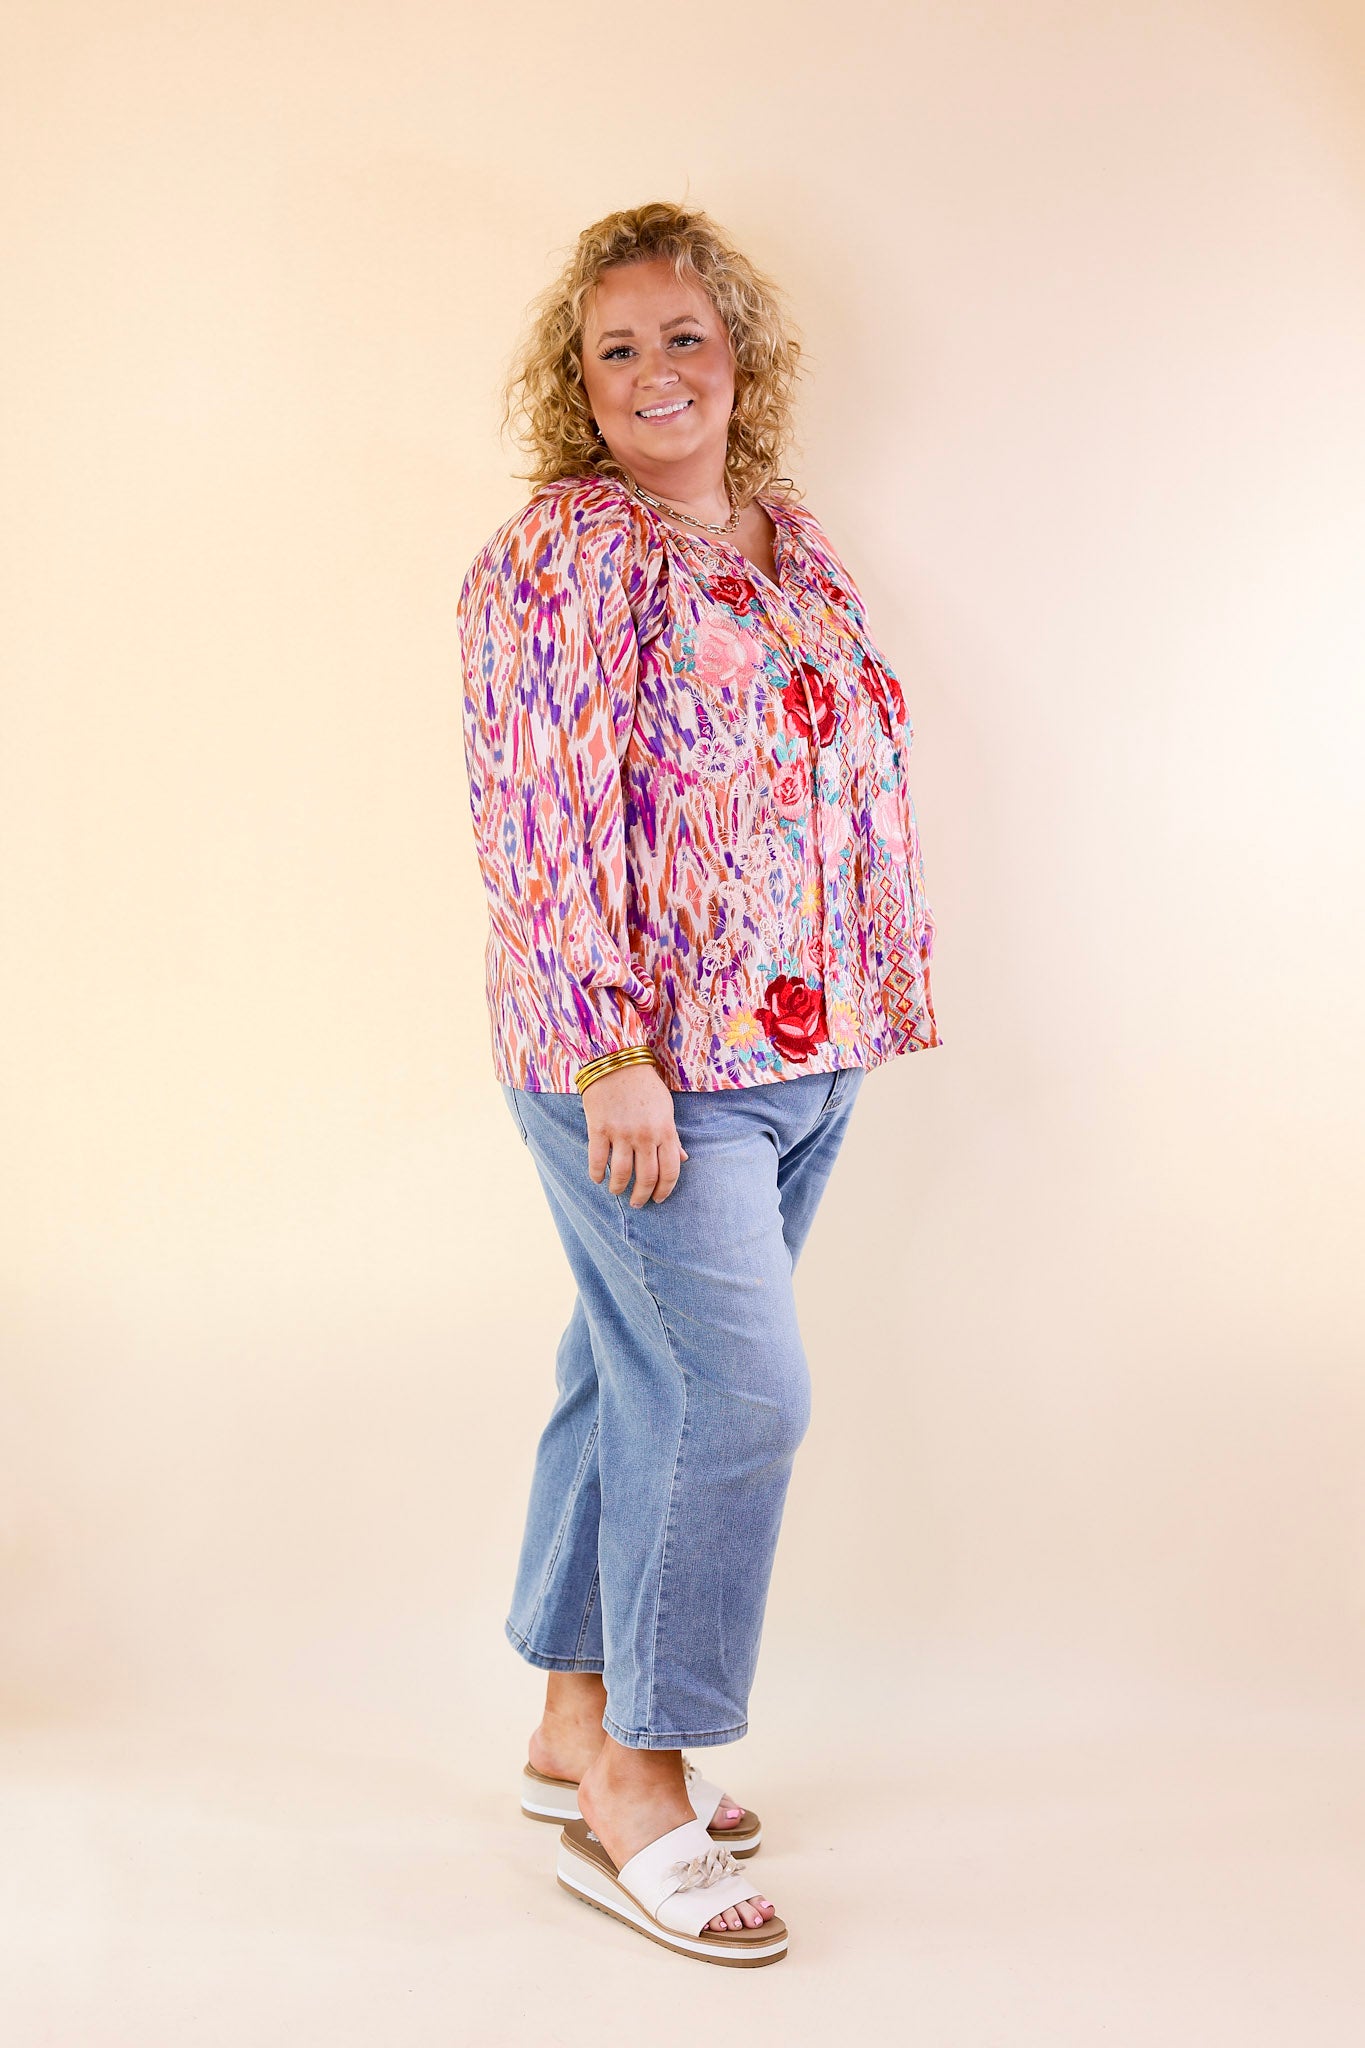 Chic Enchantment Long Sleeve Multi Color Top with Floral Embroidery - Giddy Up Glamour Boutique